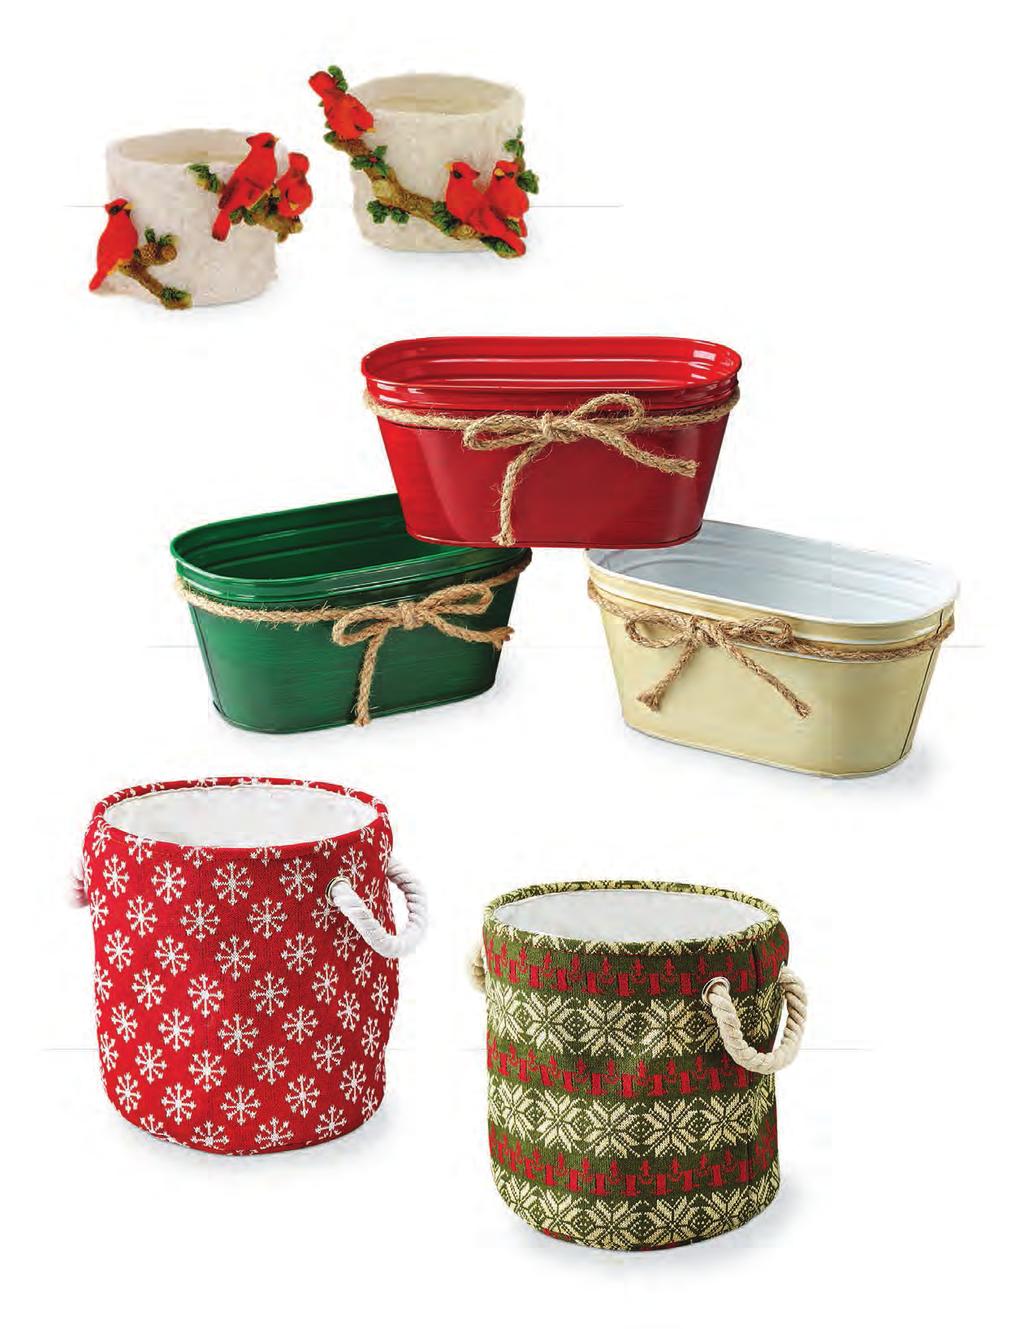 9500 Resin Container 6.5 x 4.5 opening 8/$1.99 ea. 37066 Oval Metal Container with Rope Decoration Three assorted colors 12.